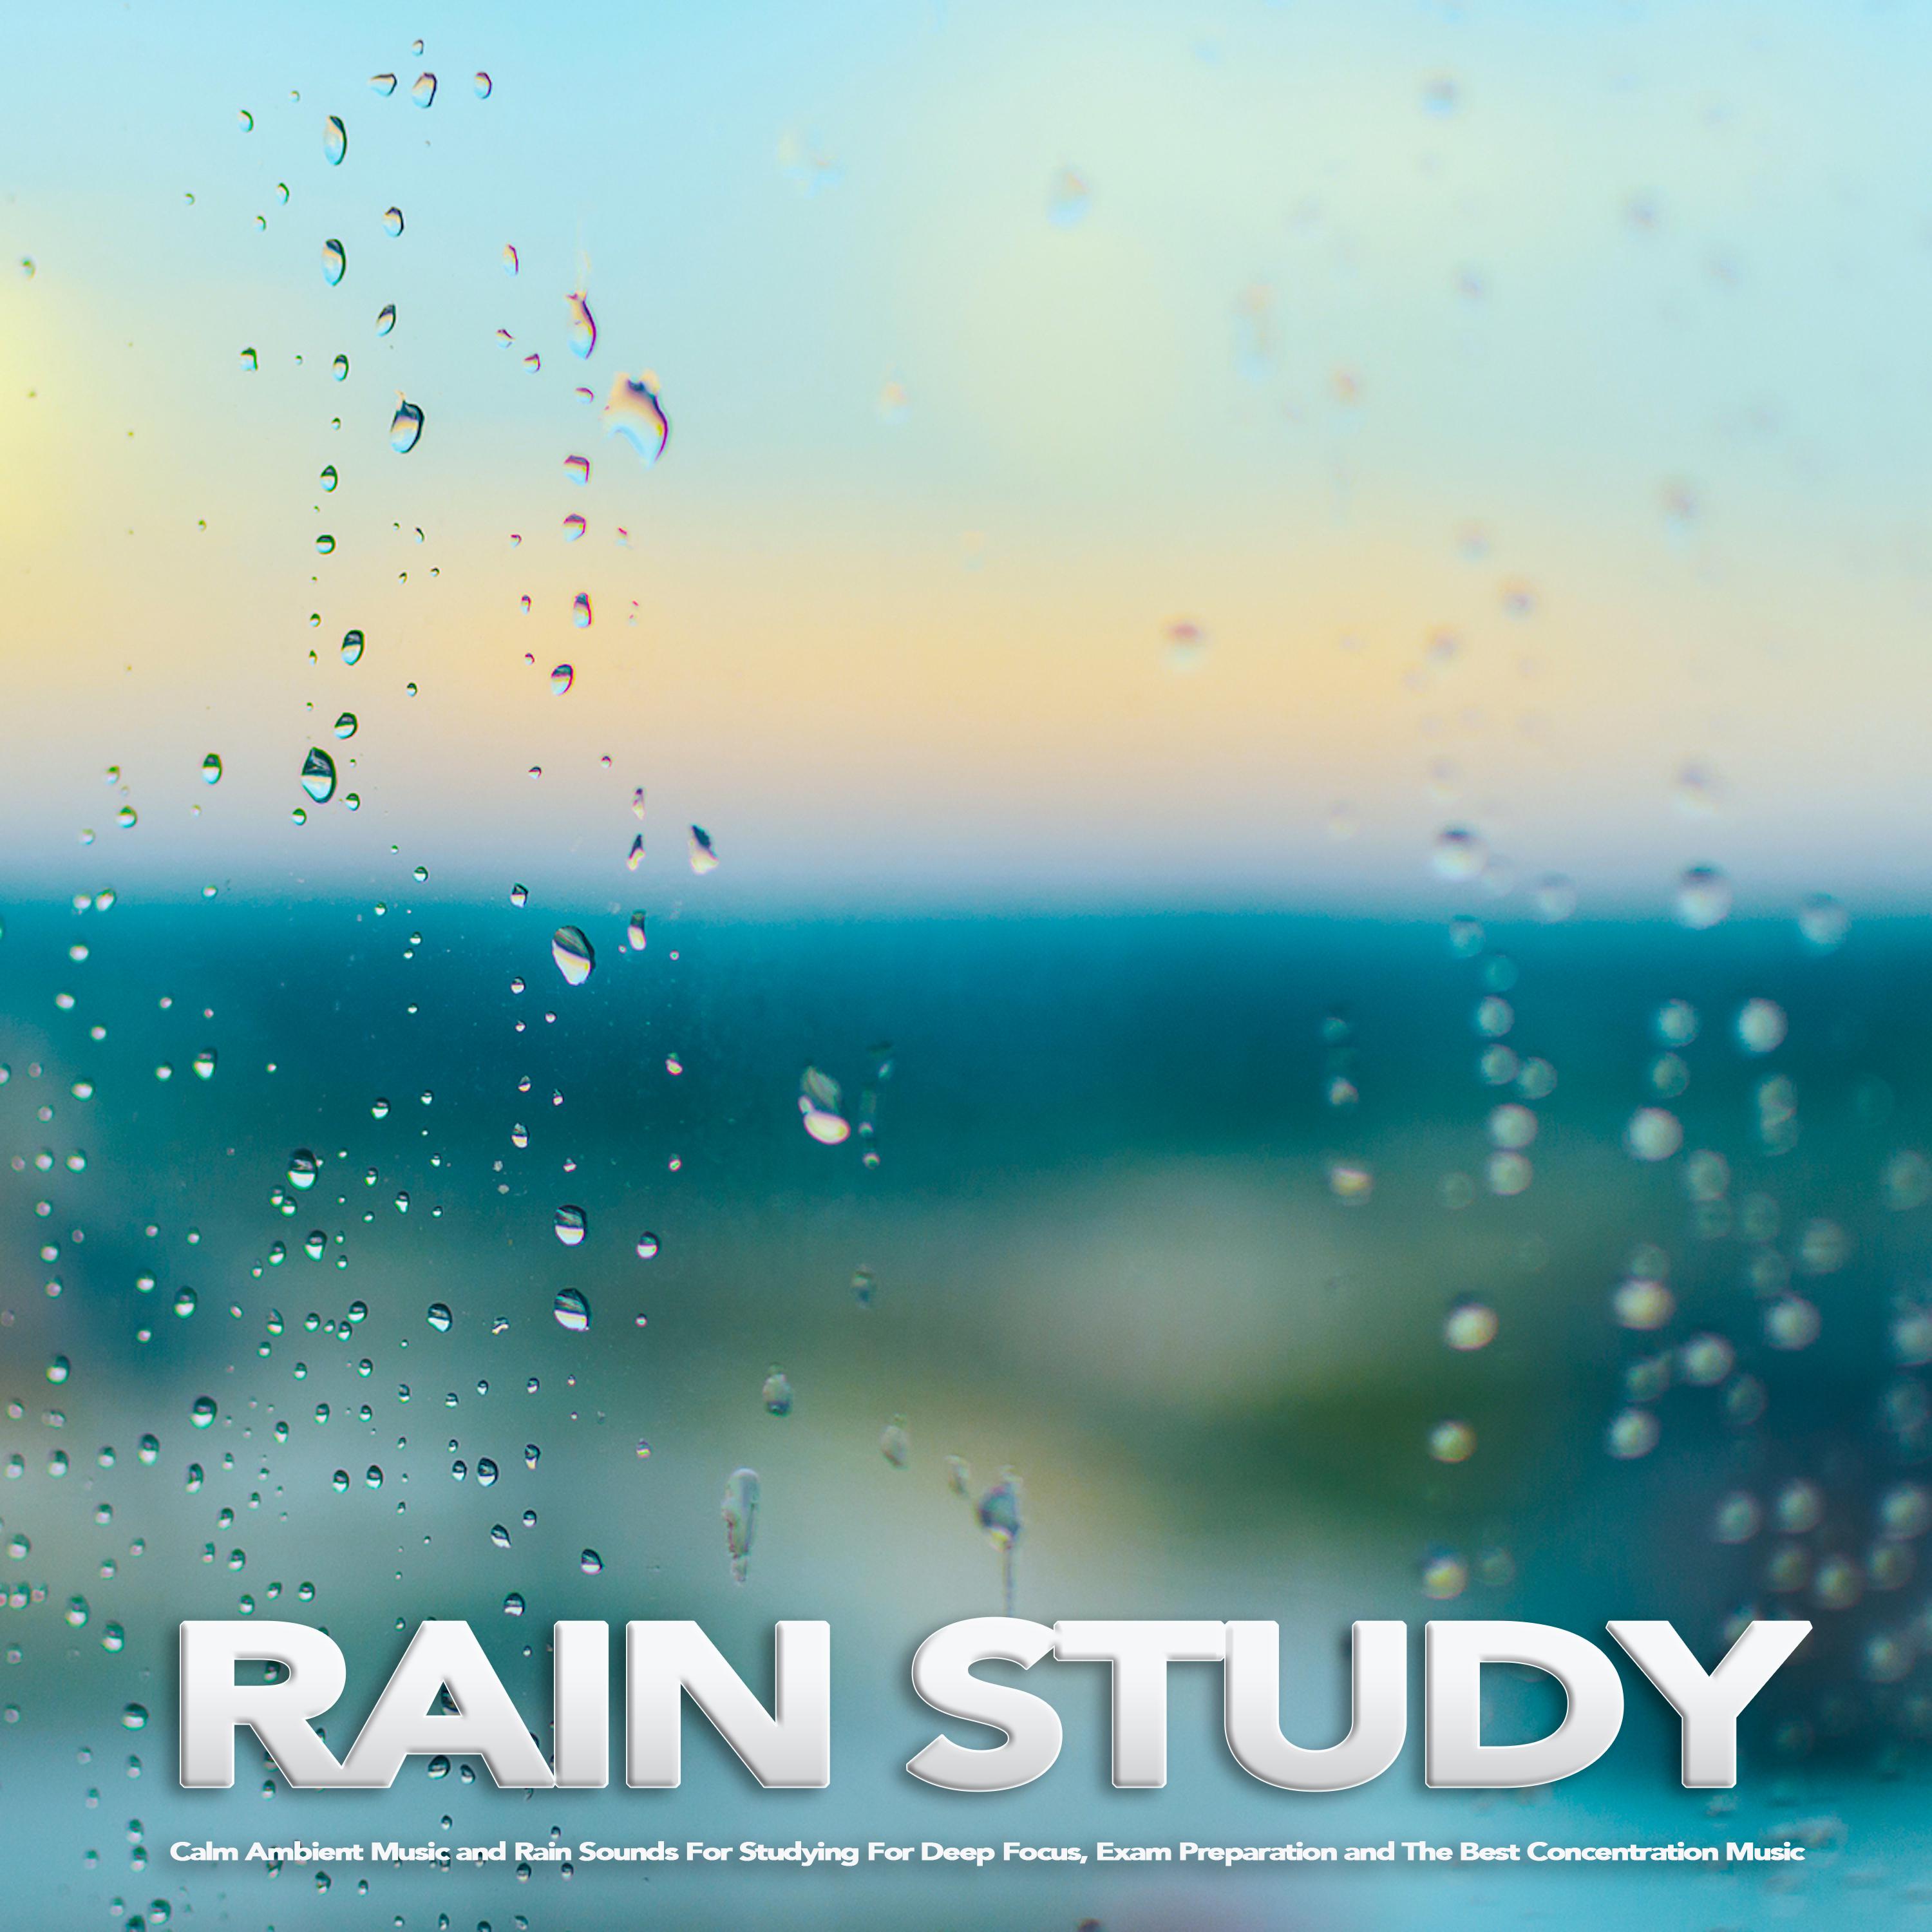 Ambient Music and Rain Sounds For Studying